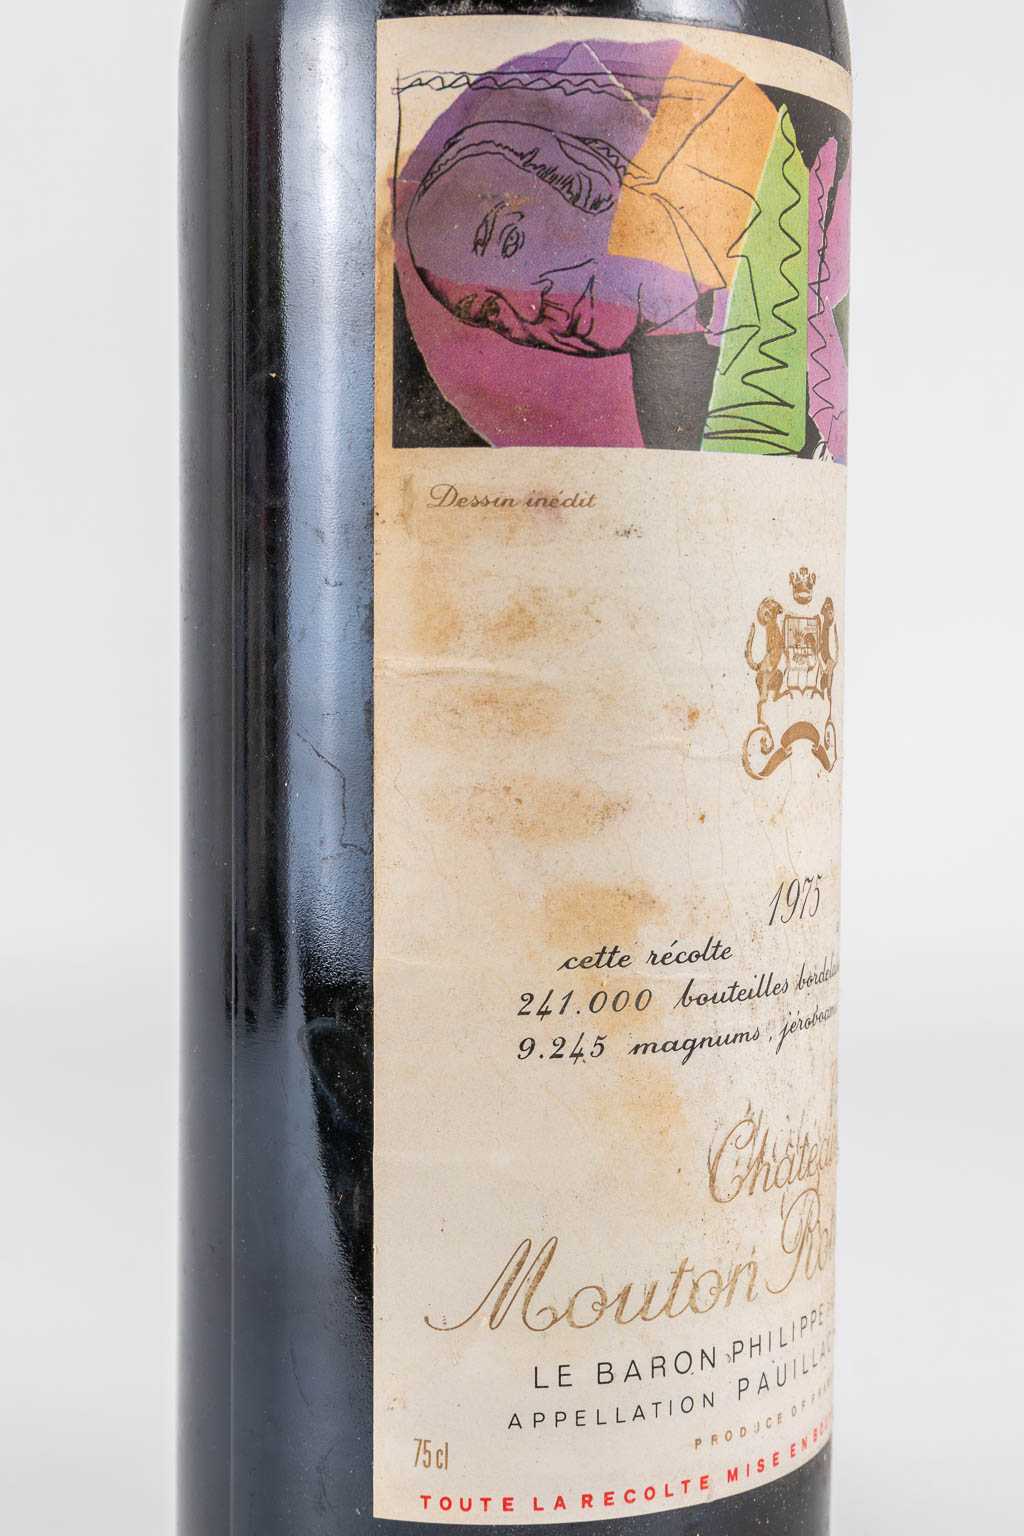 A collection of 4 bottles of Chateau Mouton Rothschild 1975, with labels made by Andy Warhol. (30 x - Image 7 of 13